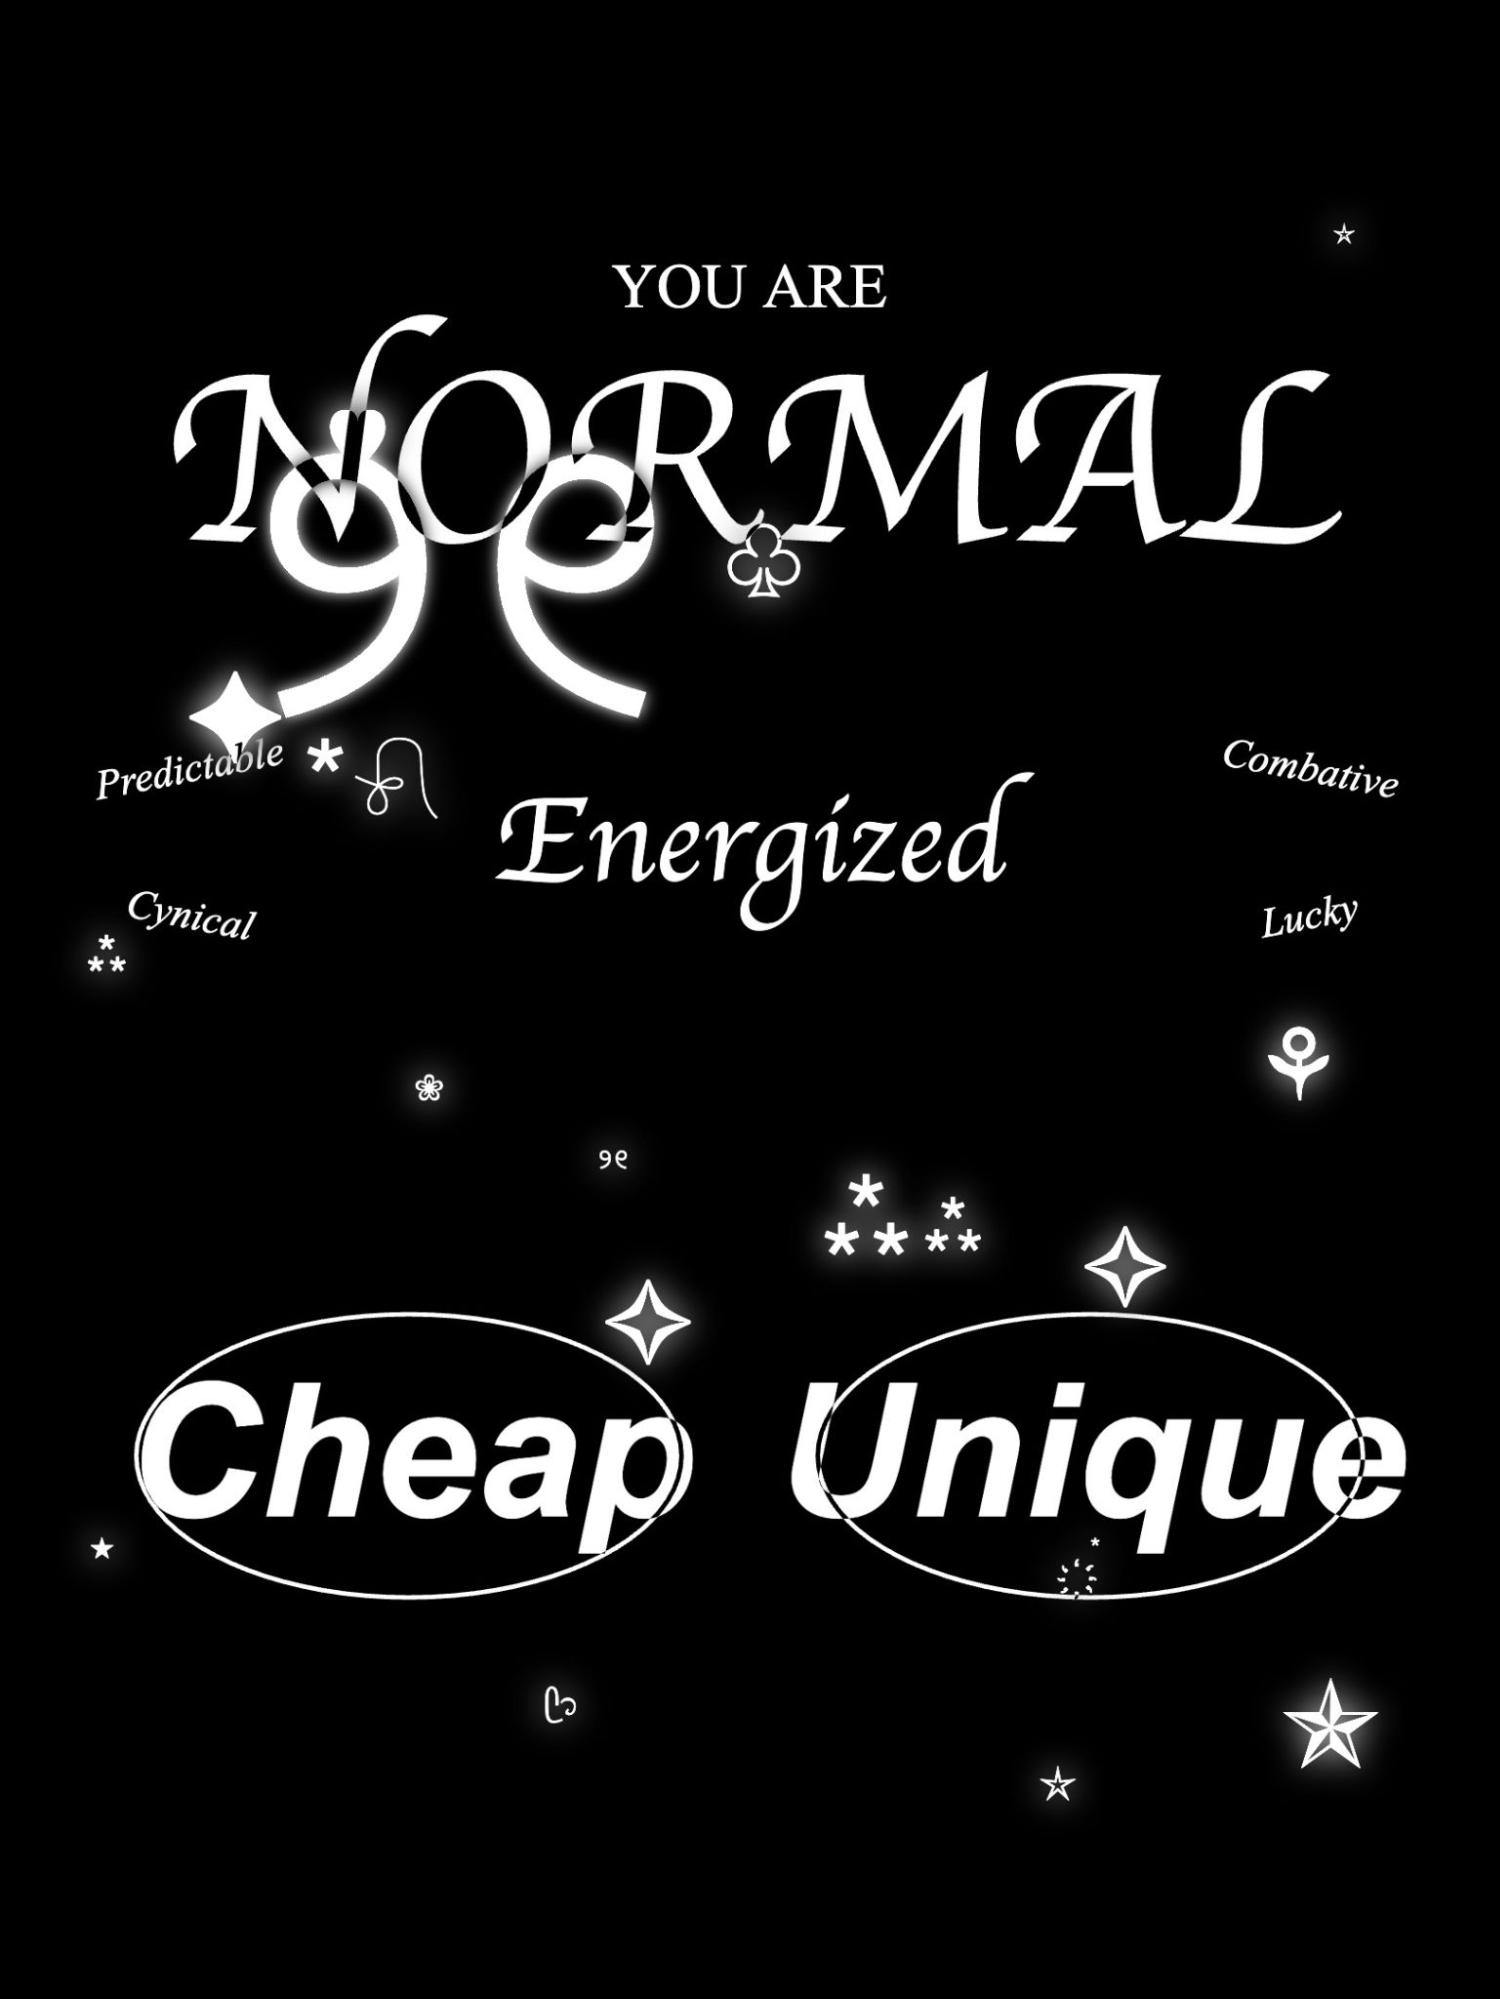 I’m Feeling Lucky #133. [A black background with white text that reads “You are Normal, Energized, Cheap, Unique,” all in various fonts. Stars, flowers and other small symbols adorn the image.]